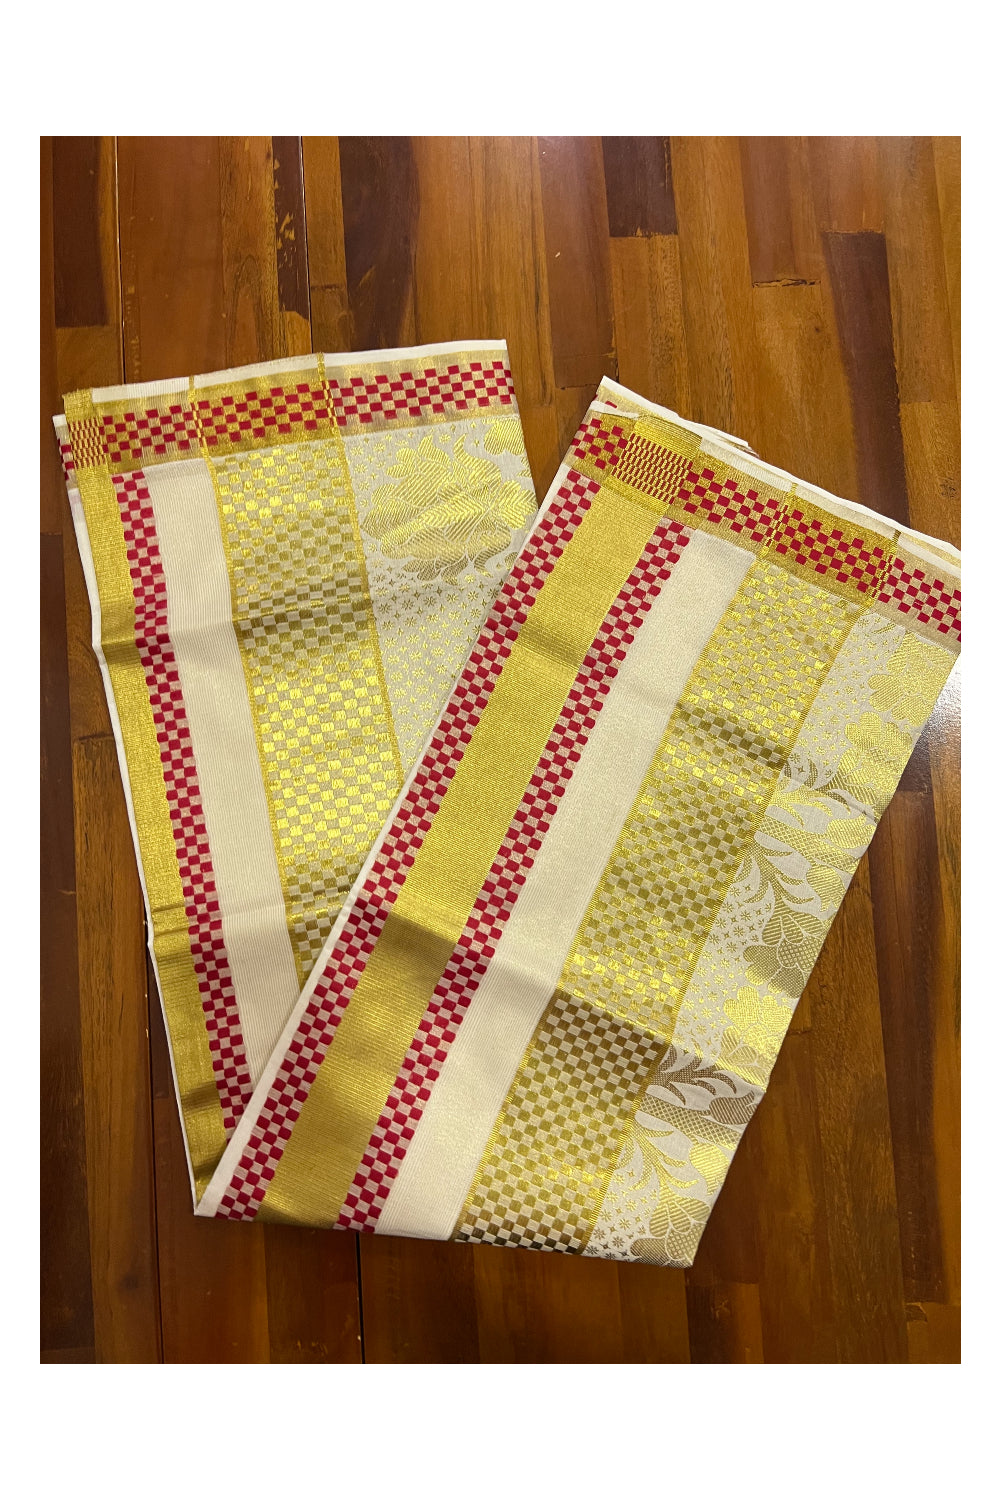 Pure Cotton Kerala Saree with Kasavu Woven Floral Patterns on Body and Red Golden Border